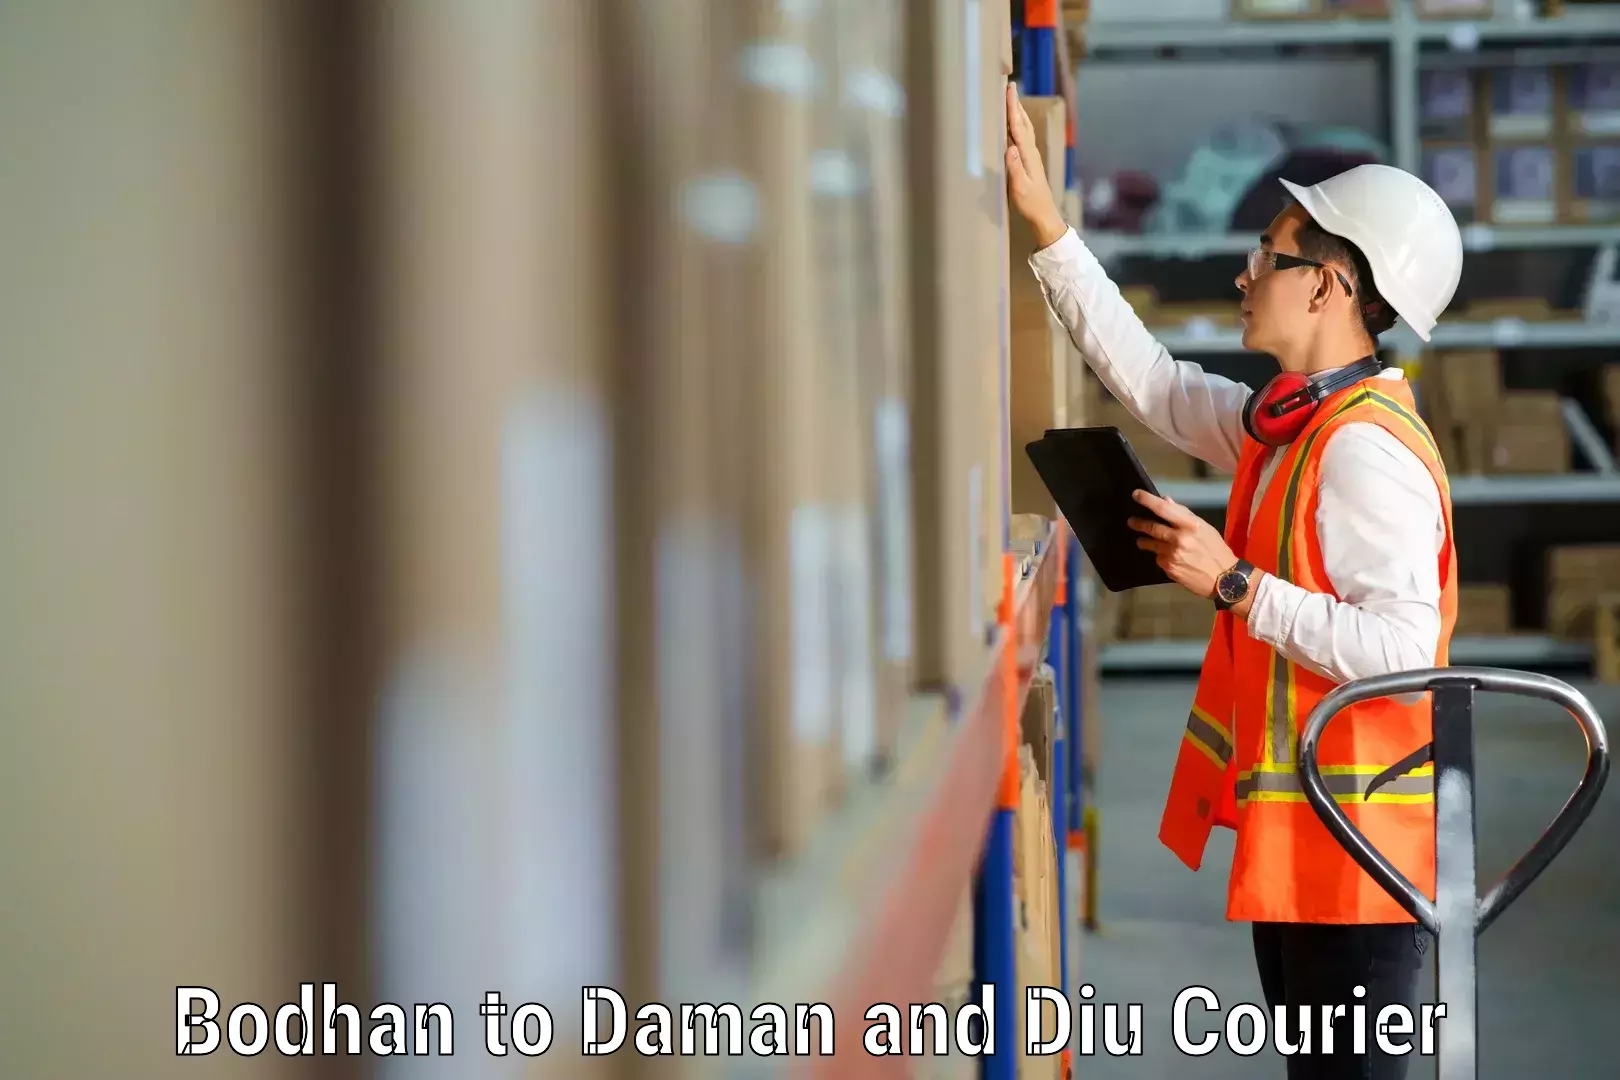 Household goods transport service Bodhan to Daman and Diu